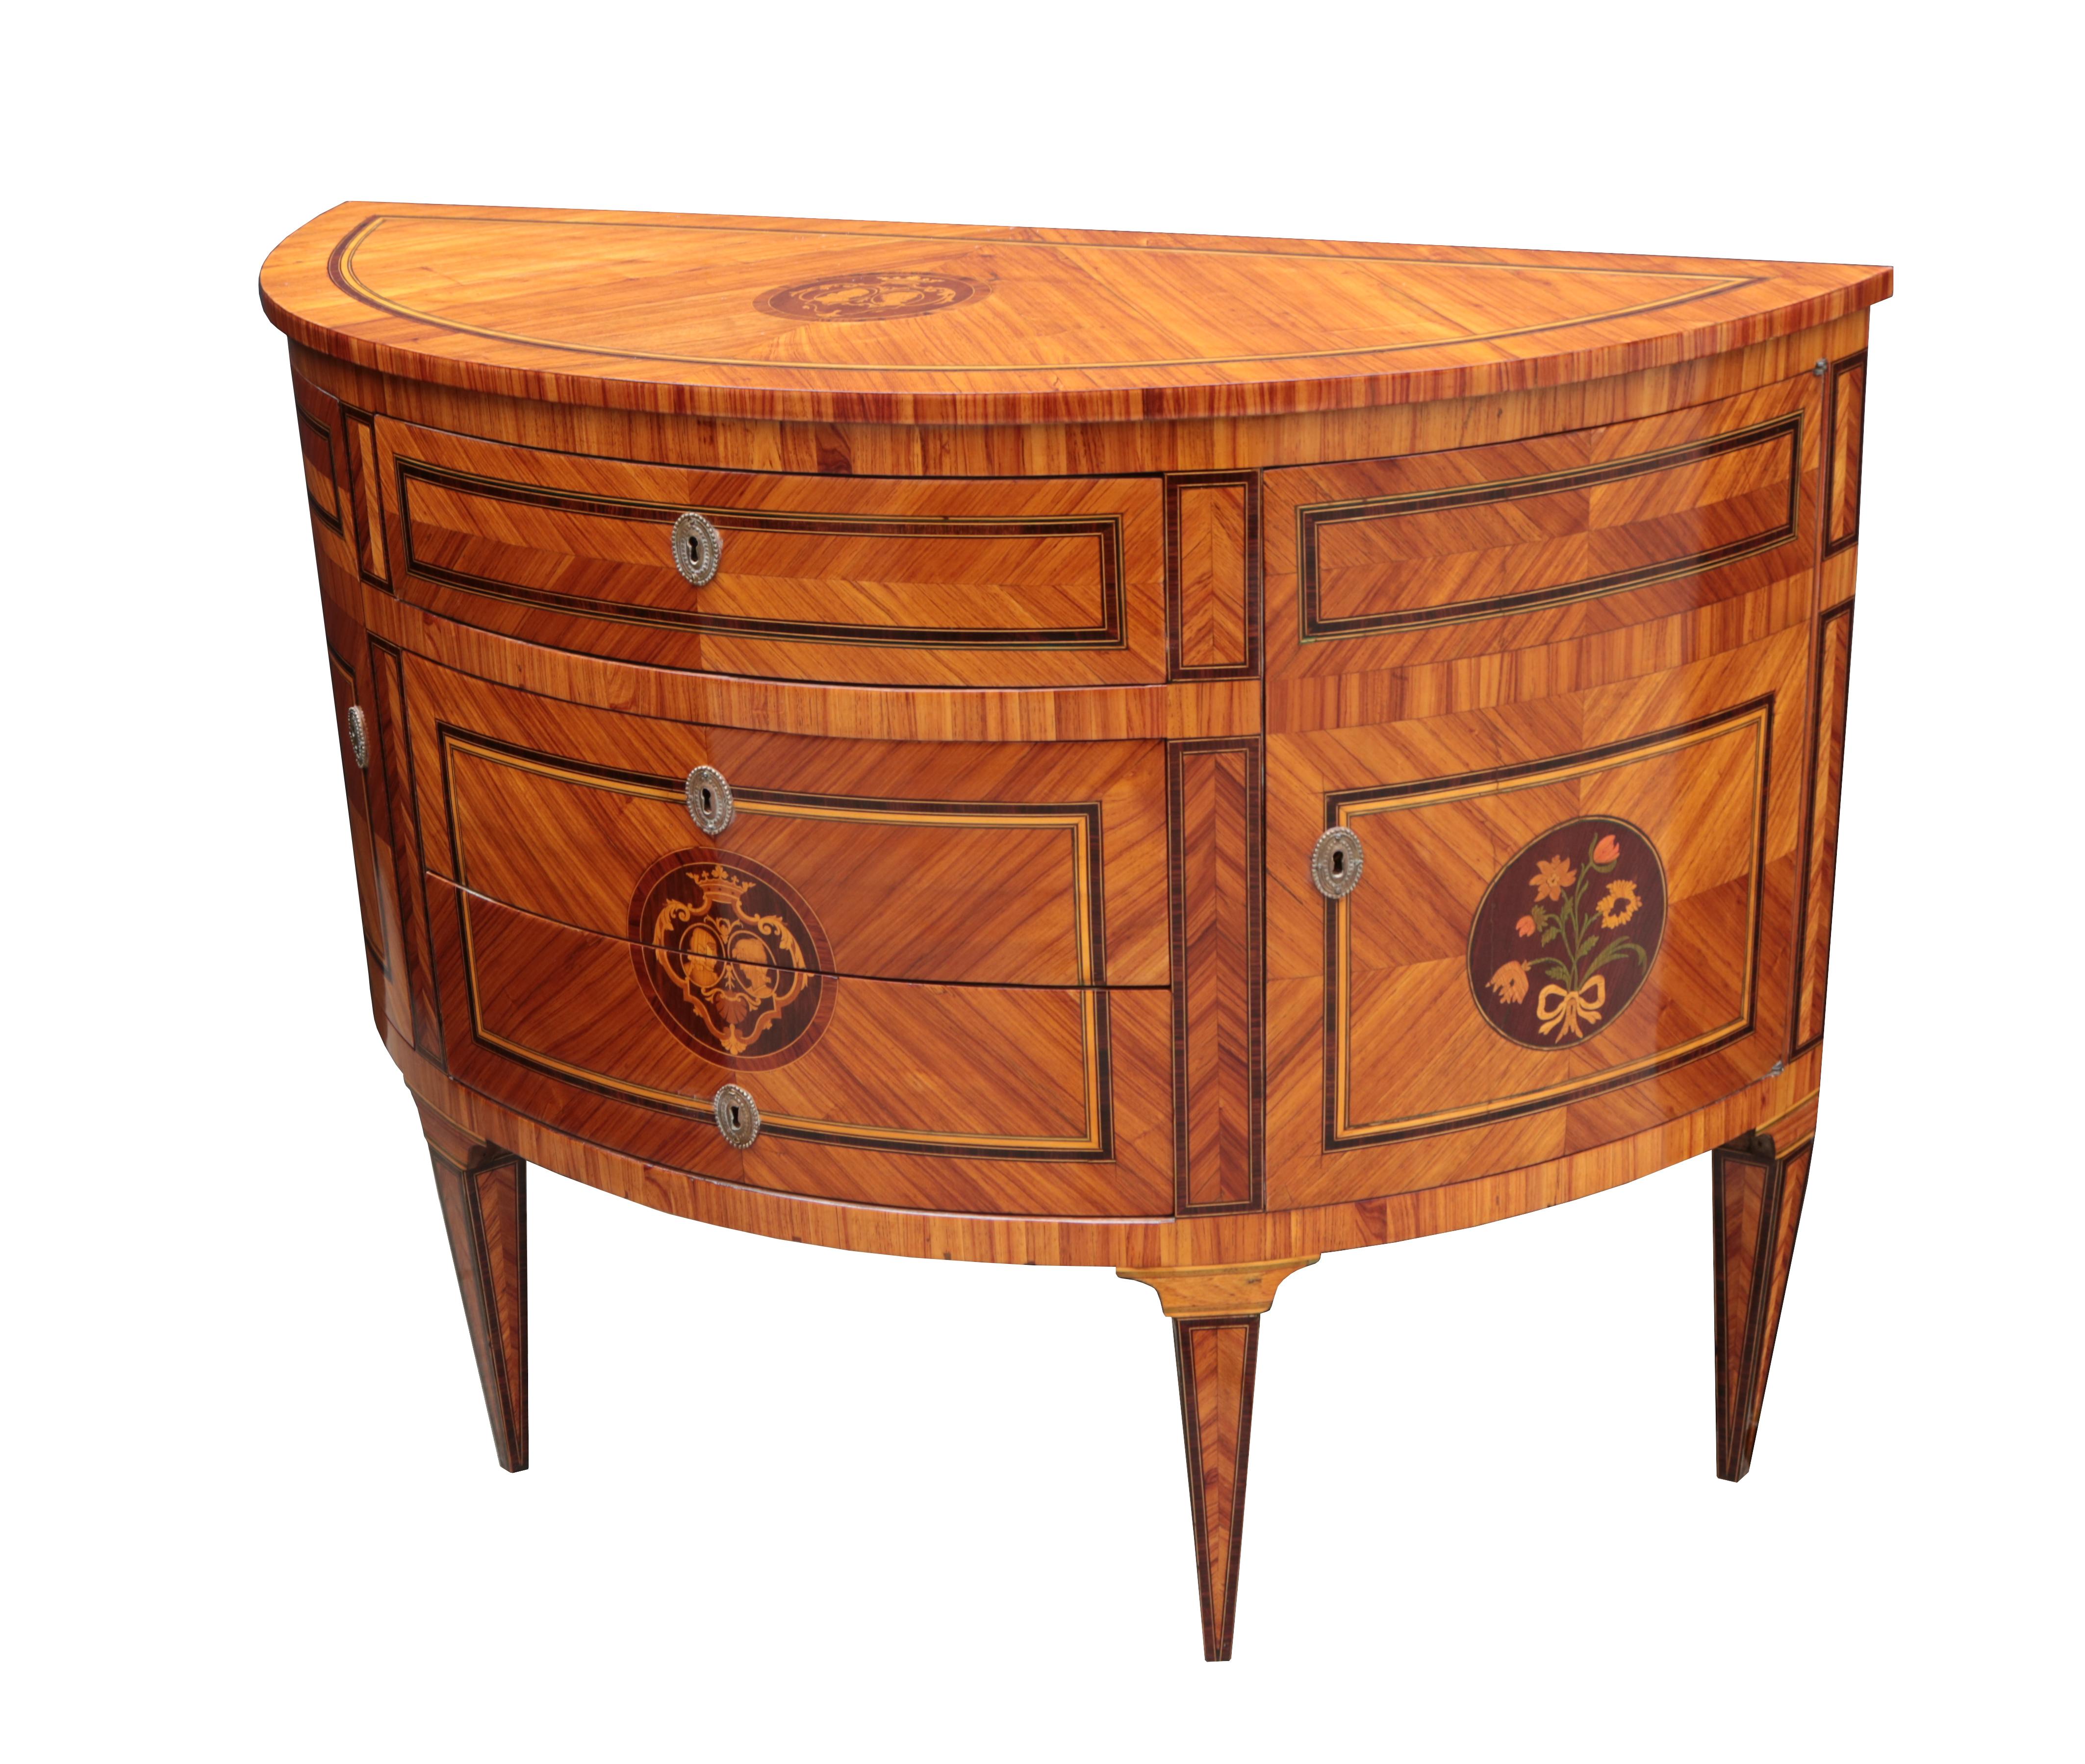 A Neoclassical Demi-Lune chest.

Various woods in marquetry patterns with fine fruitwood inlay details

and patinated brass escutcheons .

Three center drawers flanked by side cabinets.